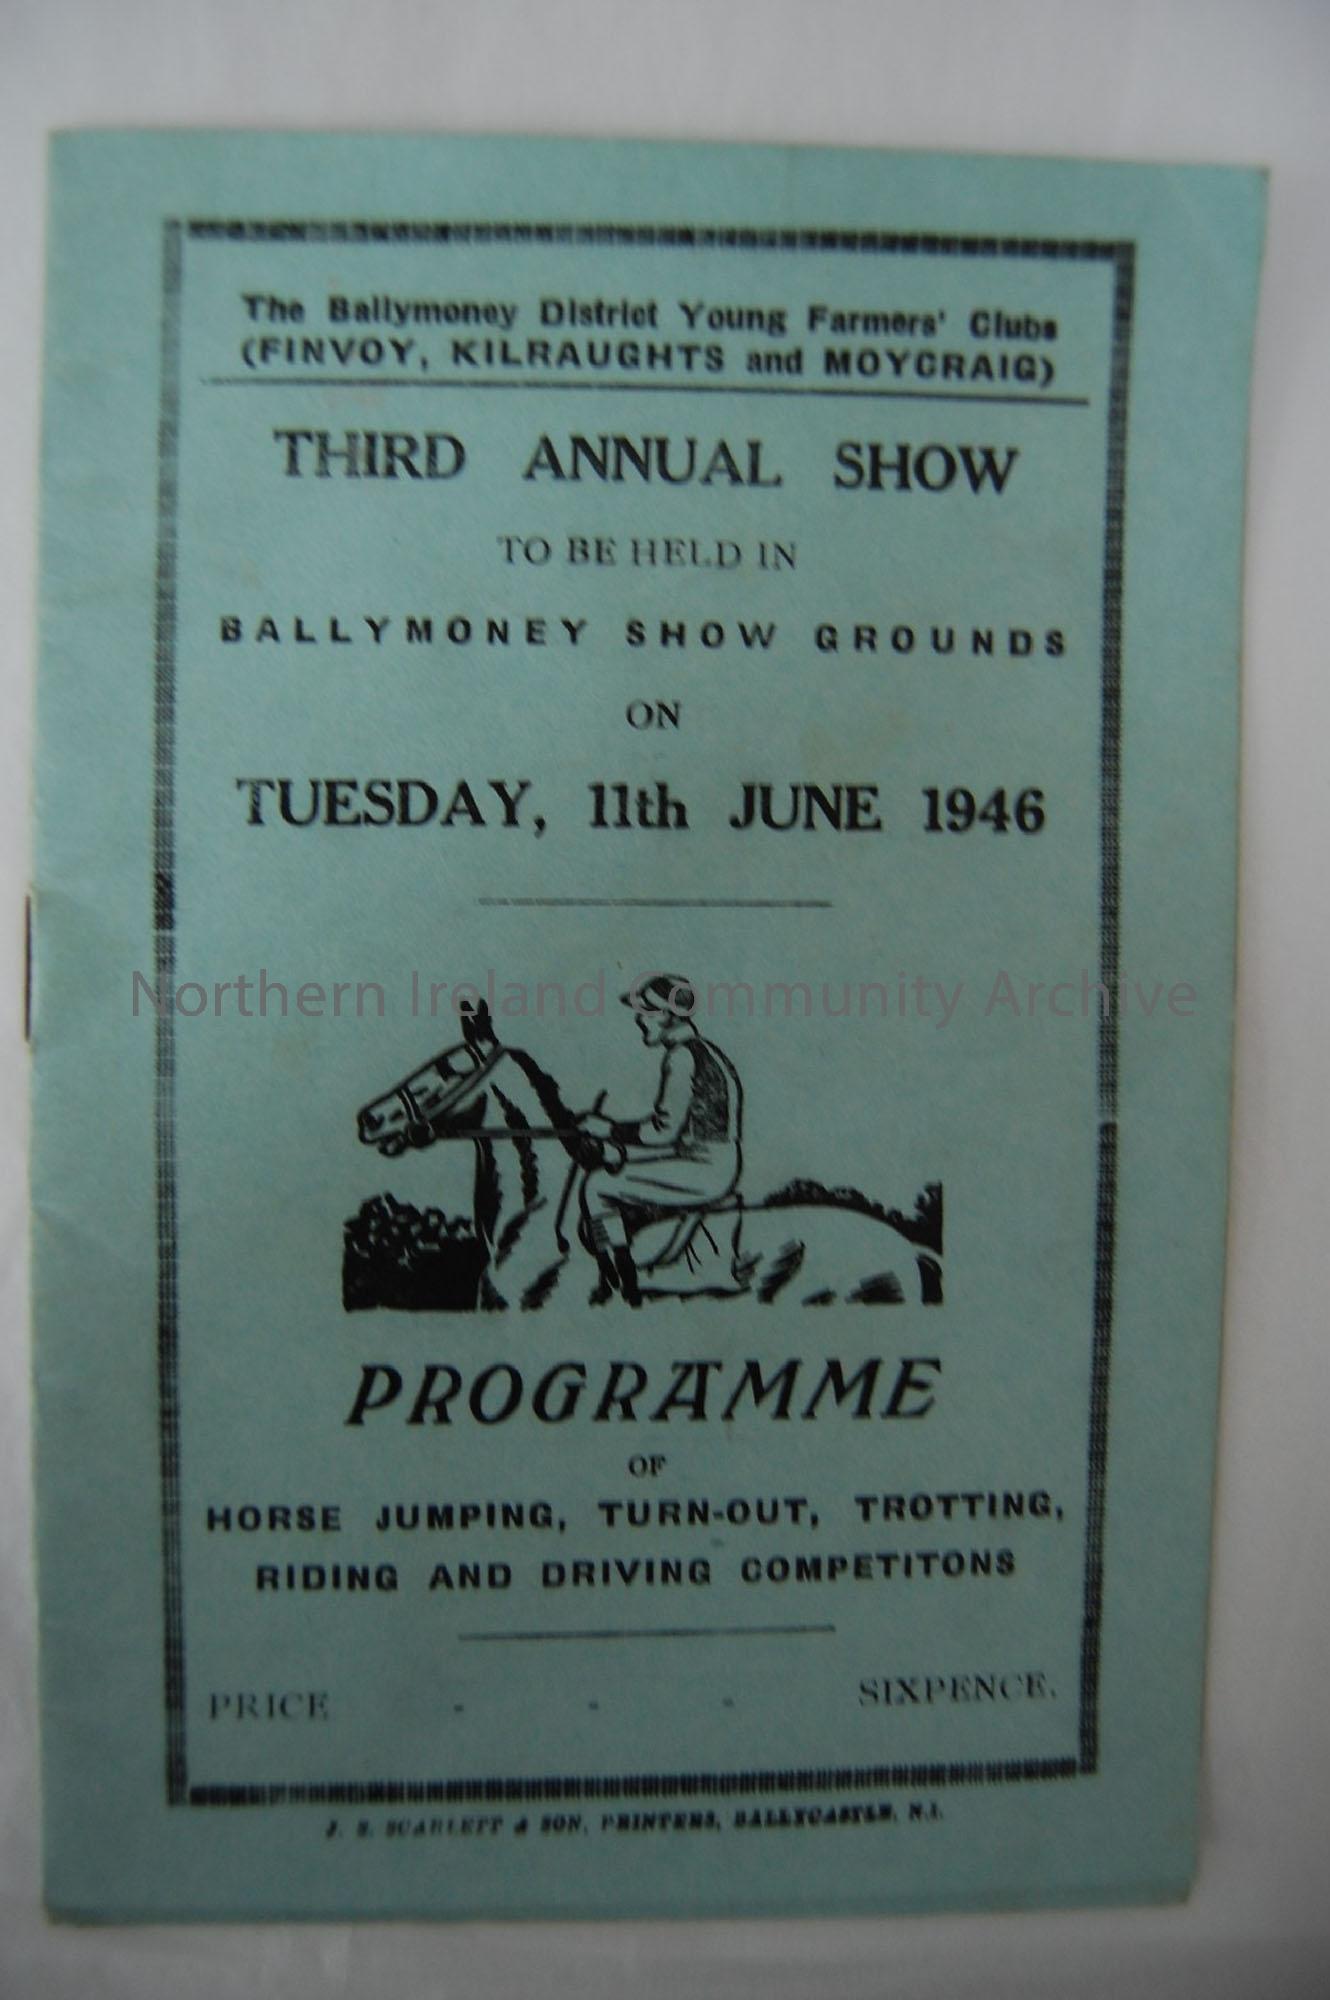 programme for 1946 Ballymoney Show. Thin, blue booklet accompanying 1946 Ballymoney Show Catalogue